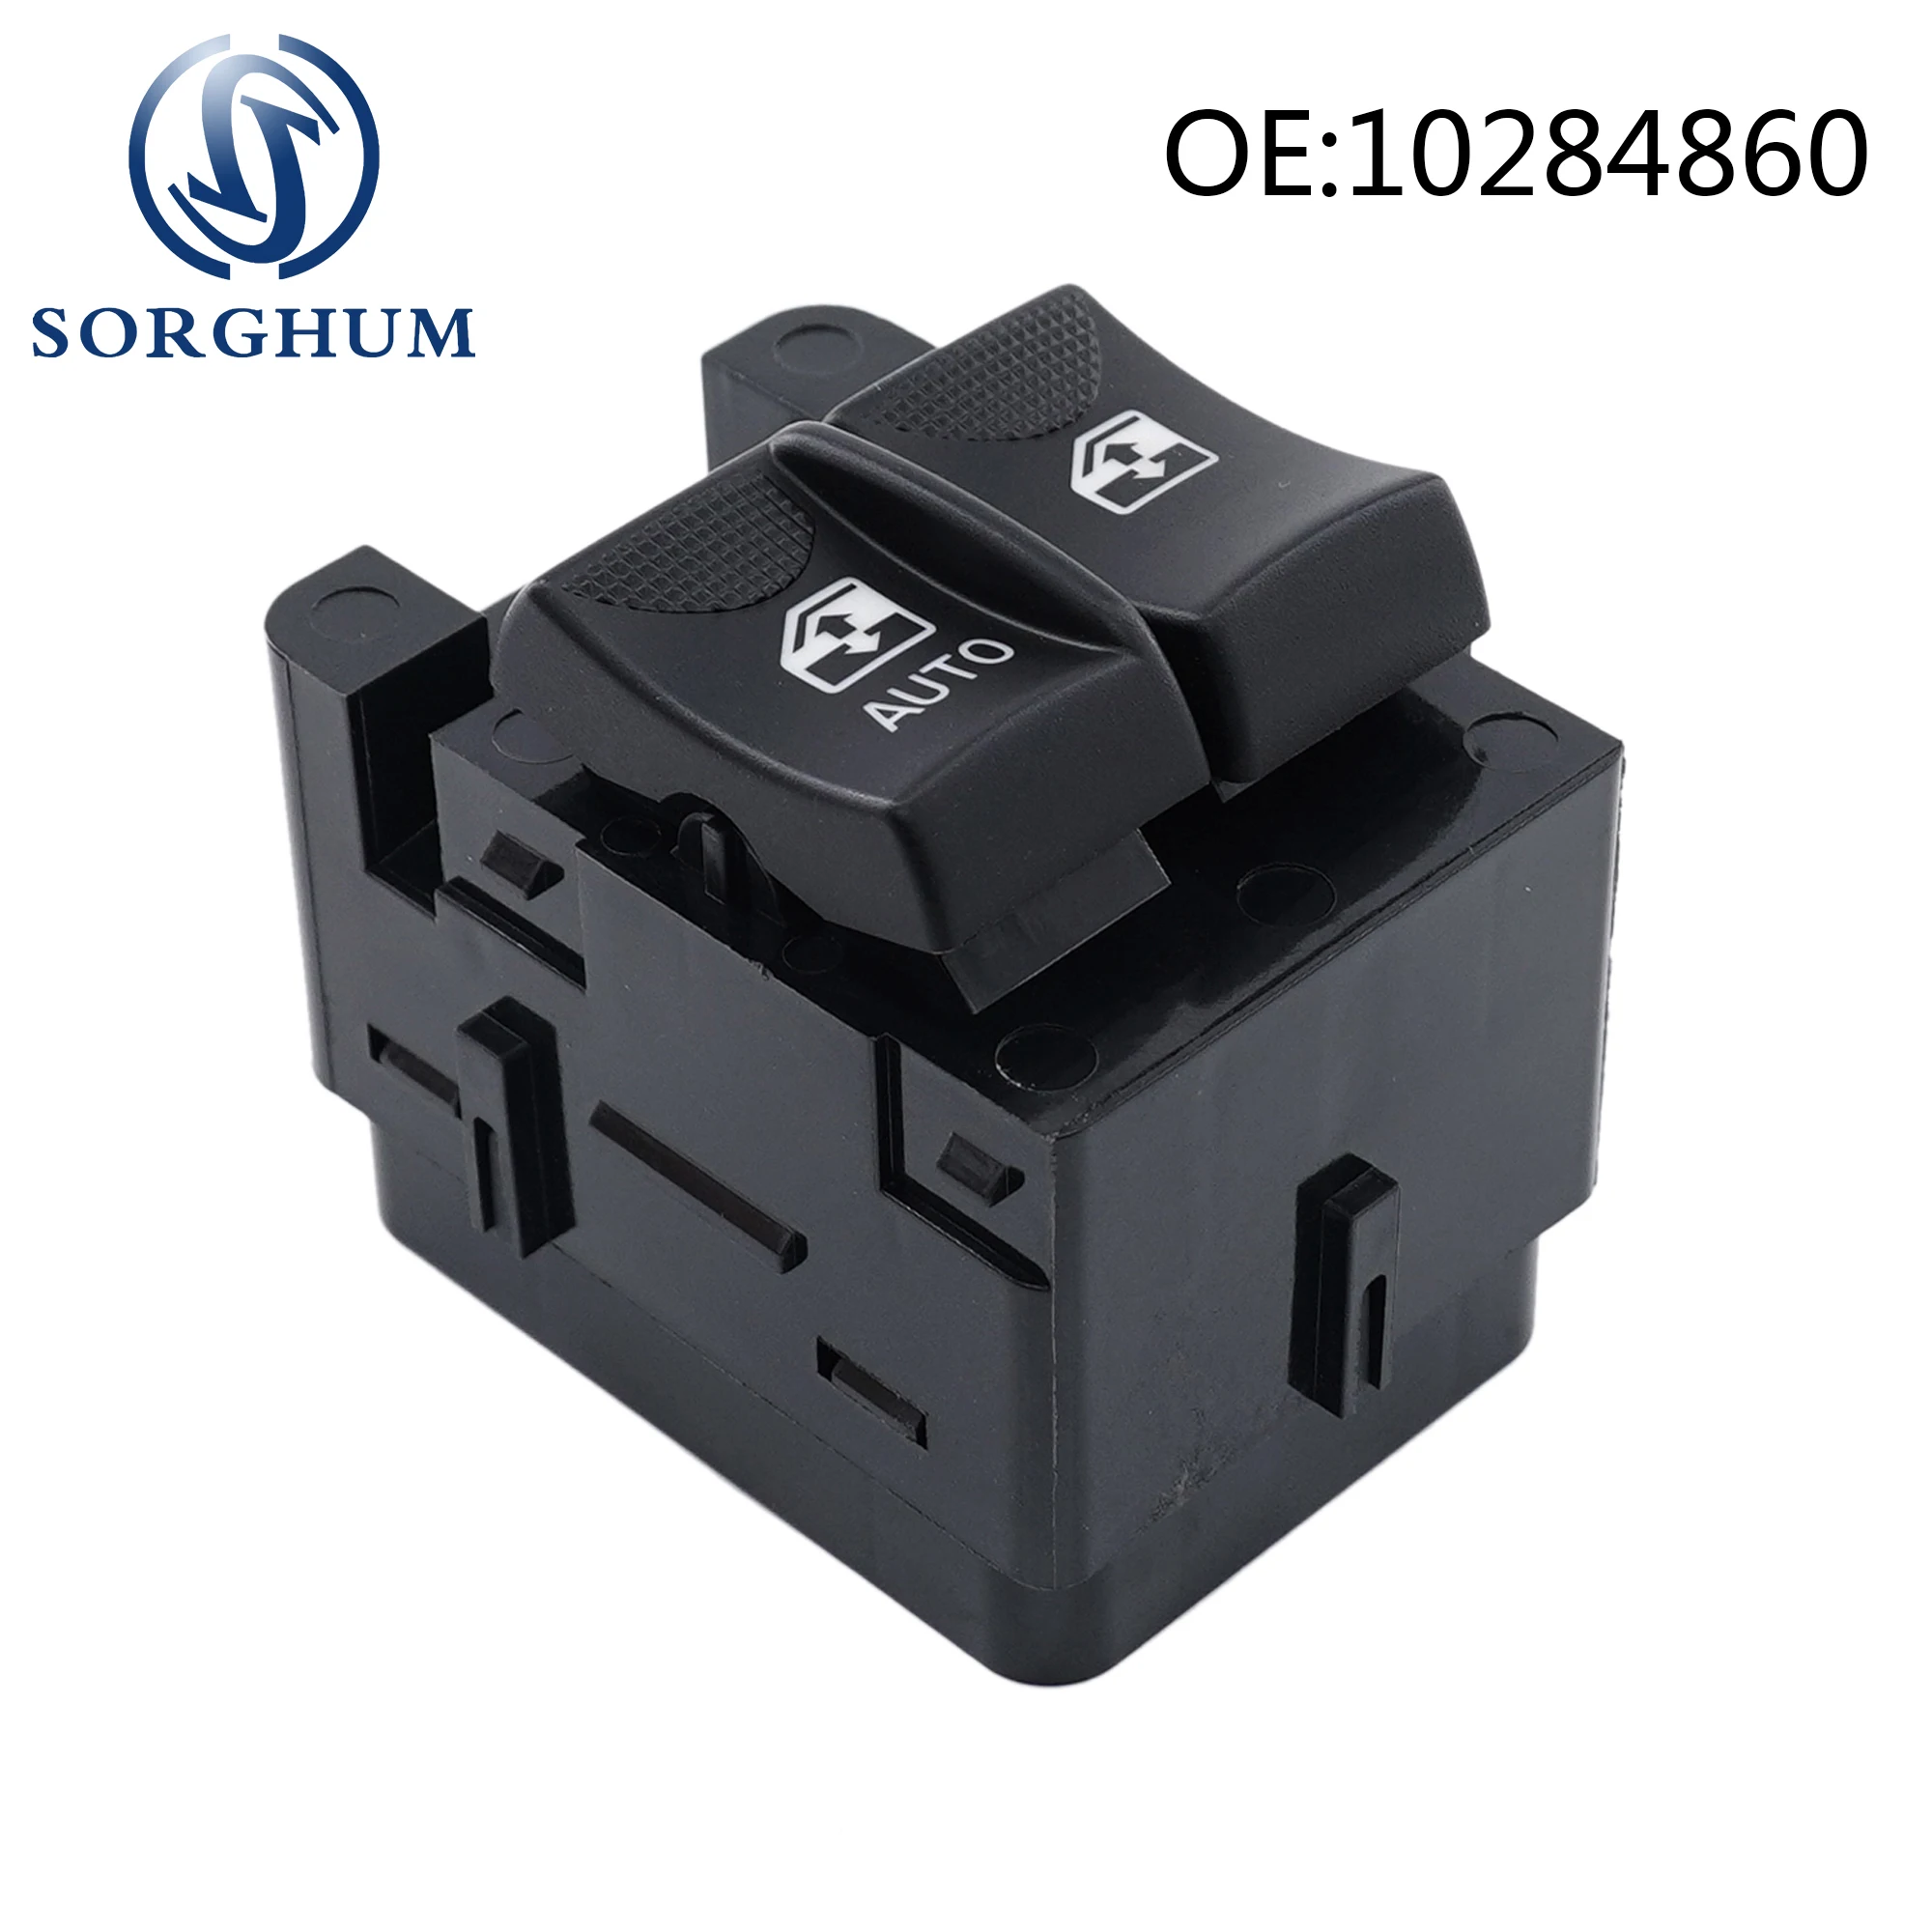 

Sorghum 10284860 Left Driver Master Power Window Control Switch Button for Chevrolet Monte Carlo 2000 - 2005 19244863 25725880